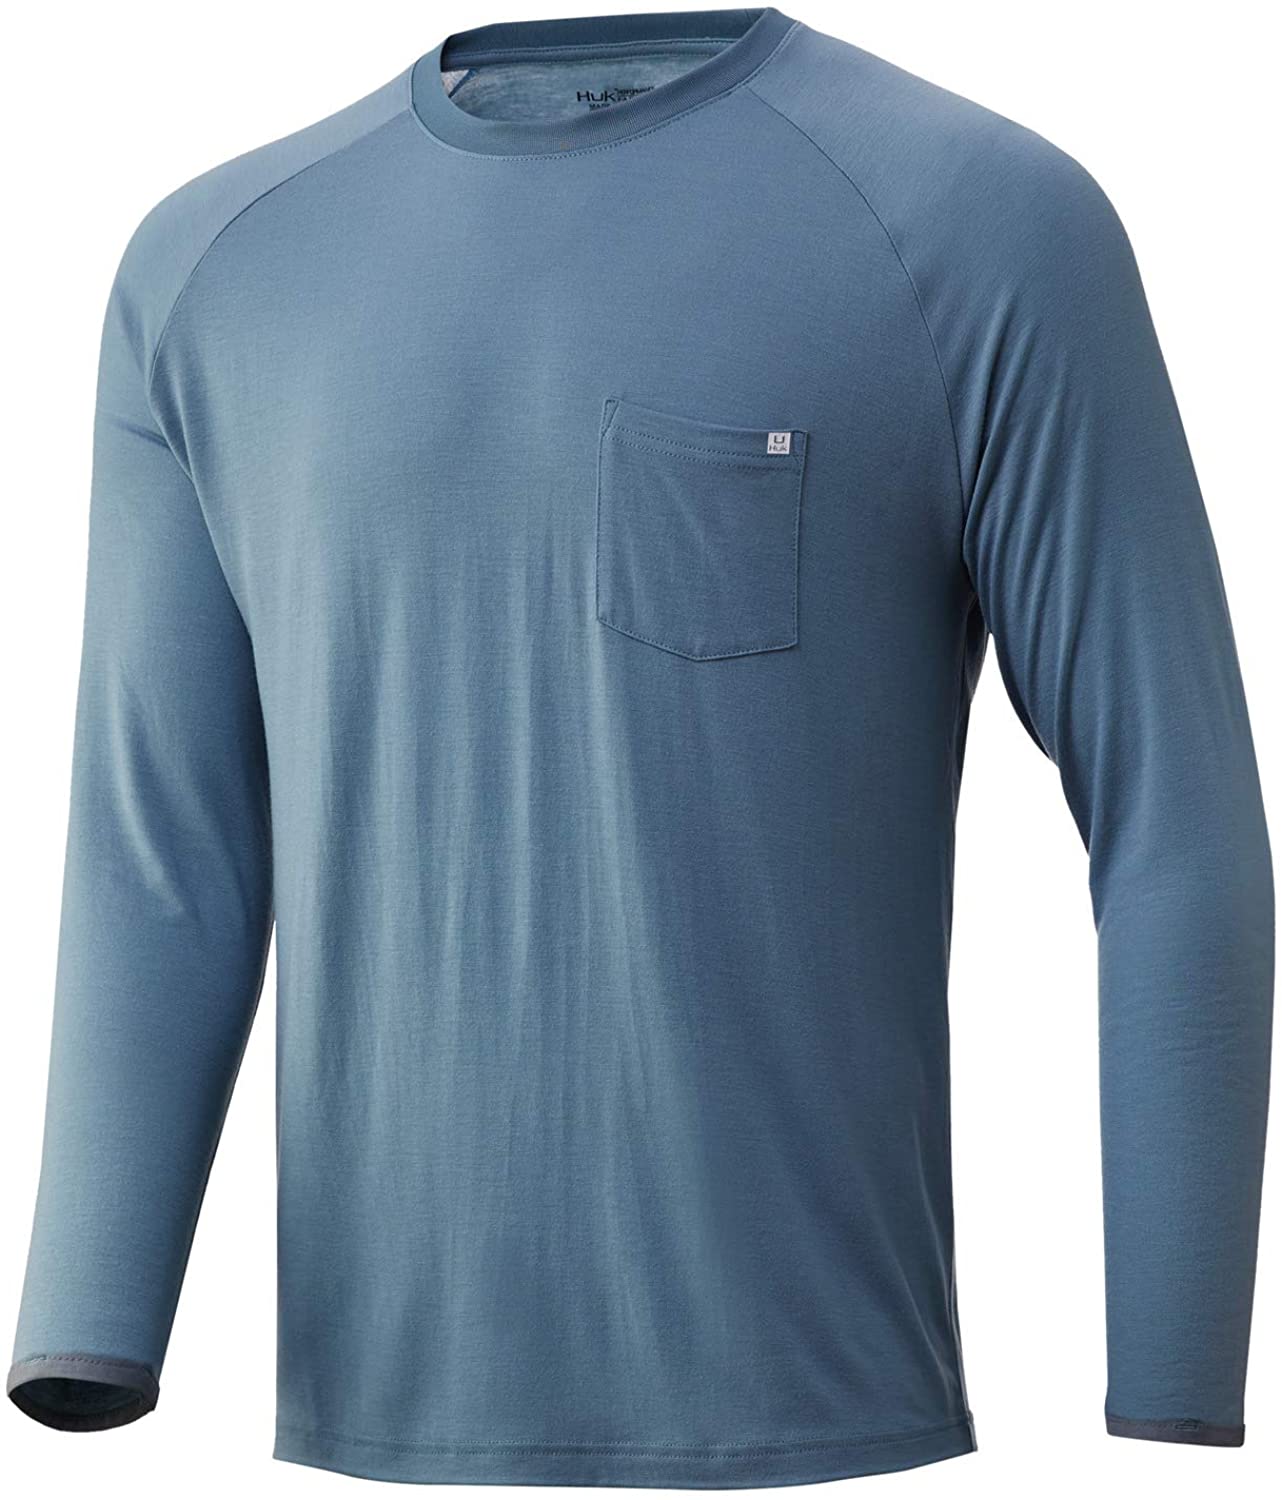 Men's Huk Waypoint Long Sleeve Shirt in Silver Blue from the front